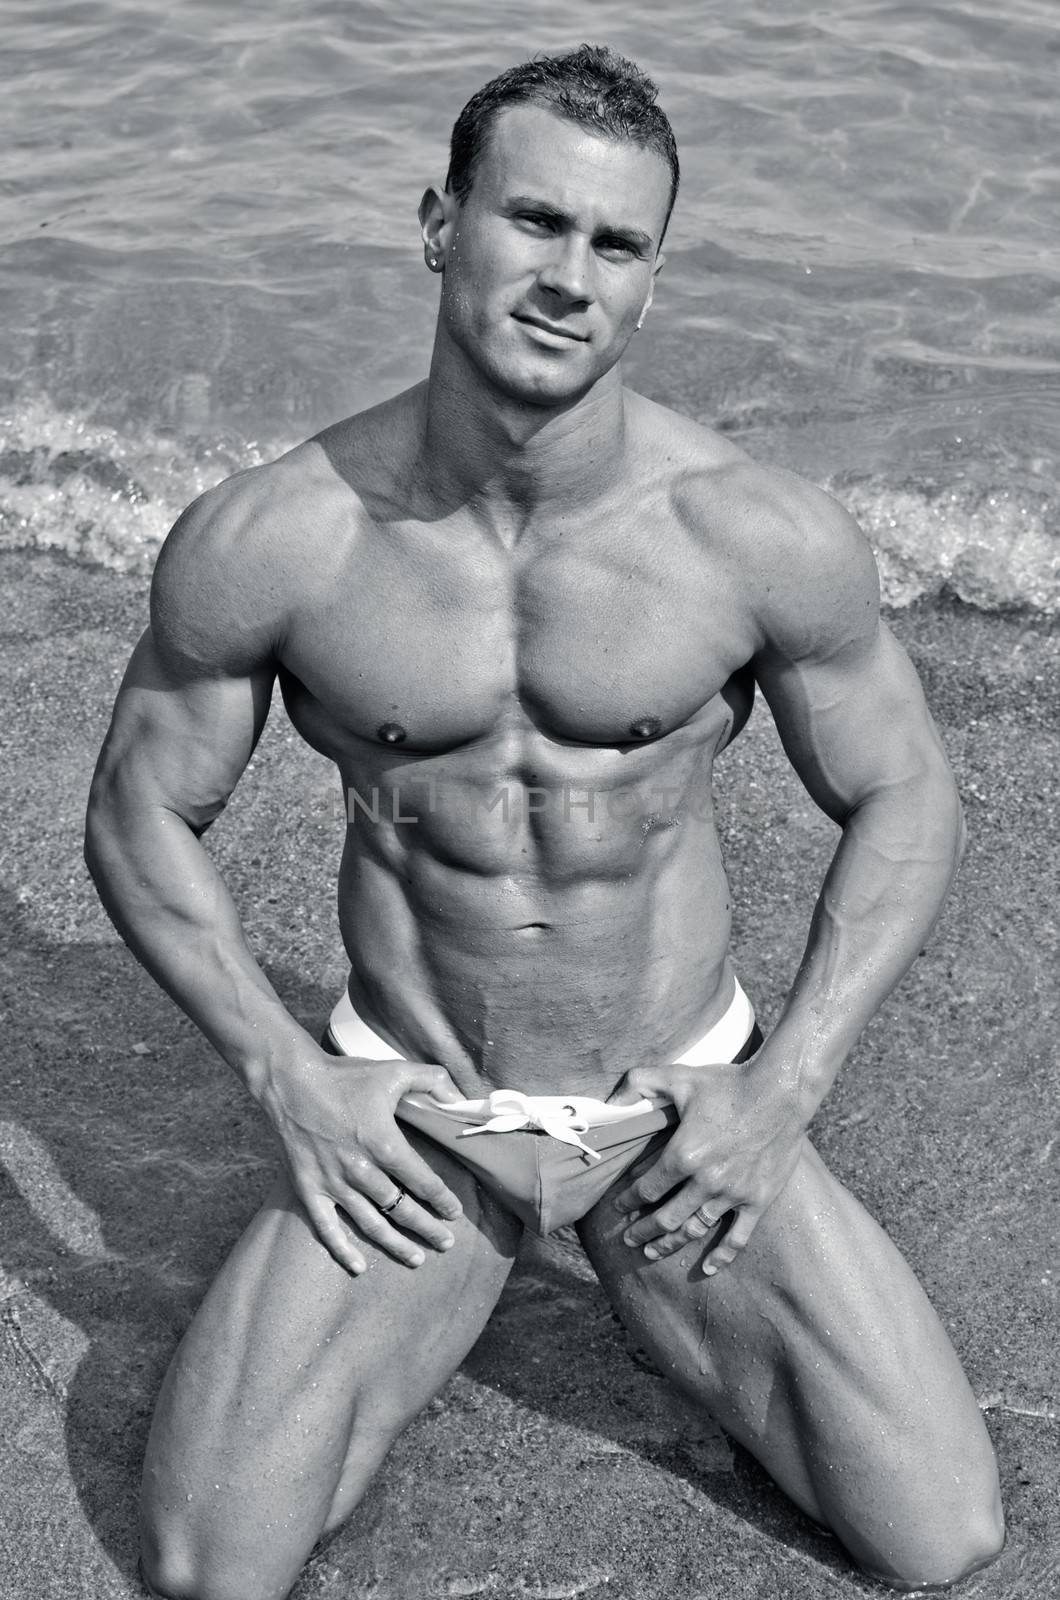 Handsome young bodybuilder in bathing suit kneeling on the beach by artofphoto